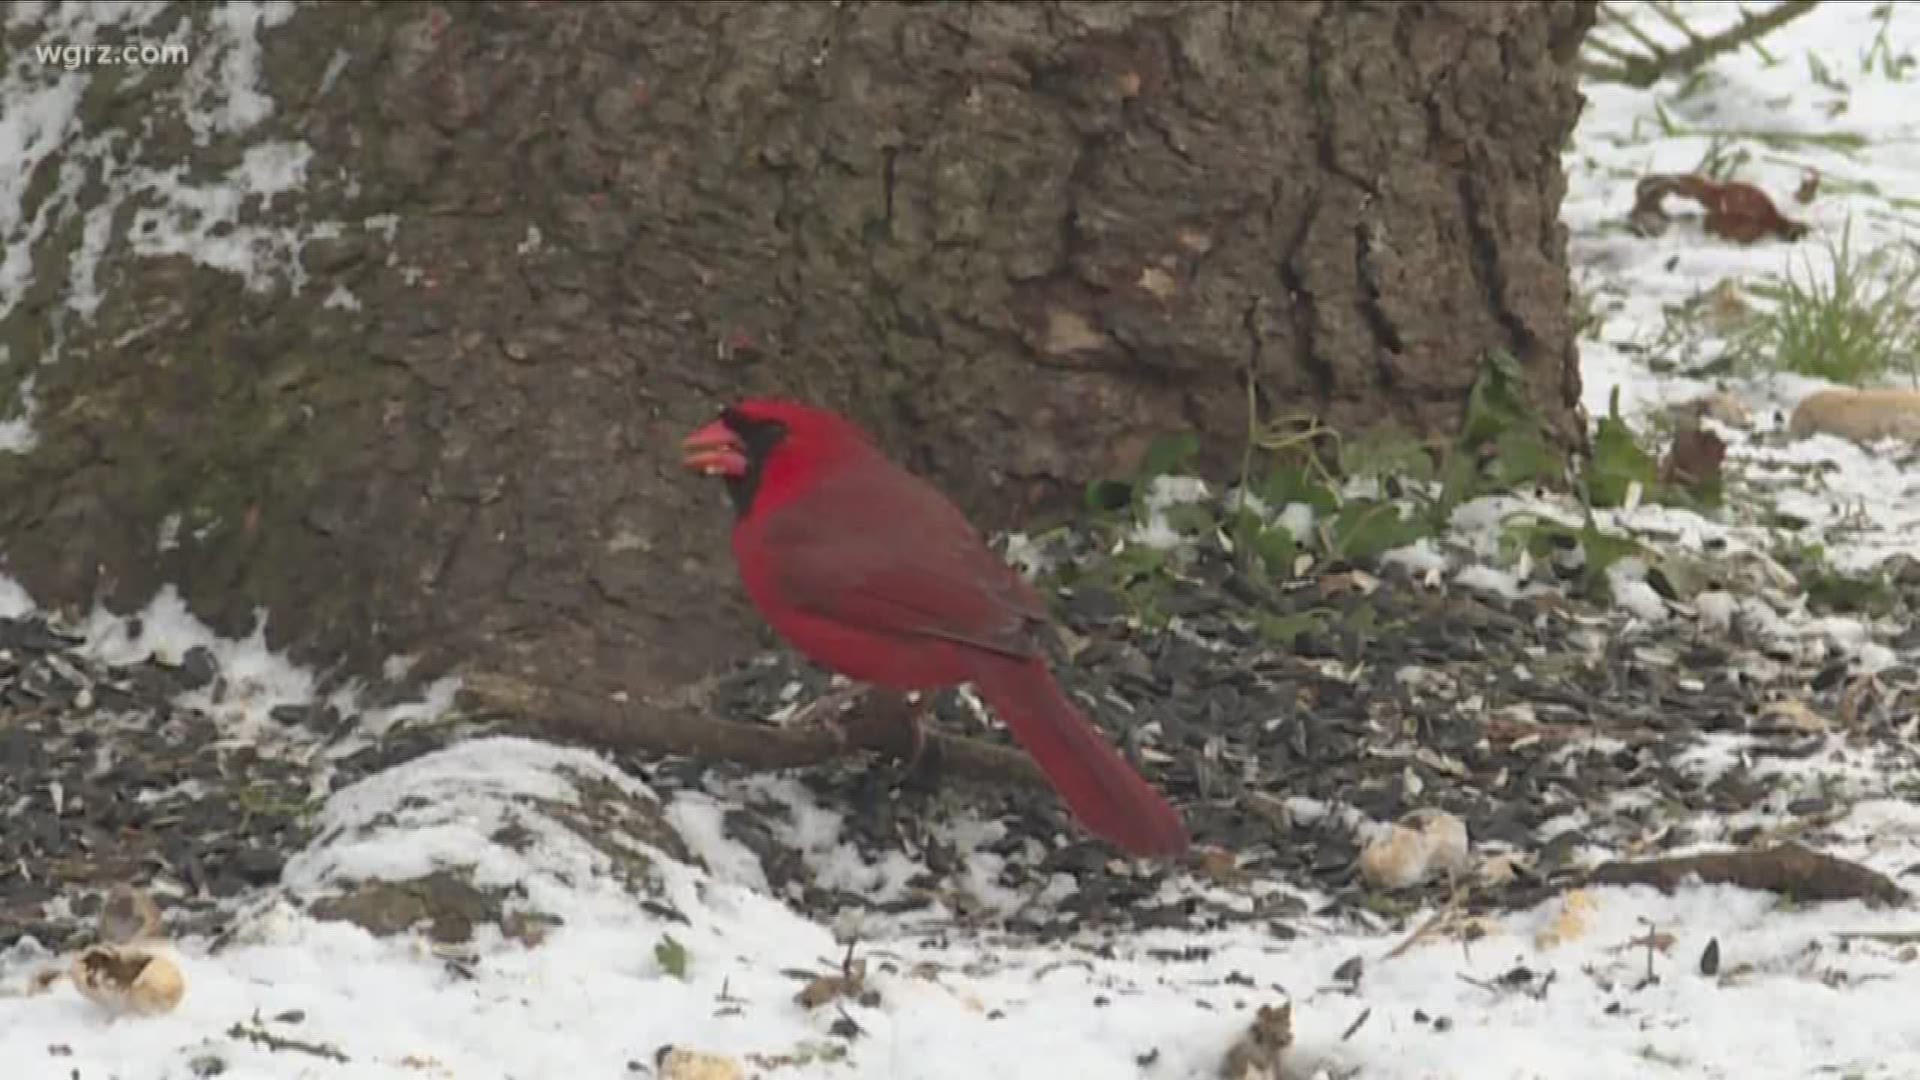 Terry Belke takes a look at how birds survive in Western New York during the winter.